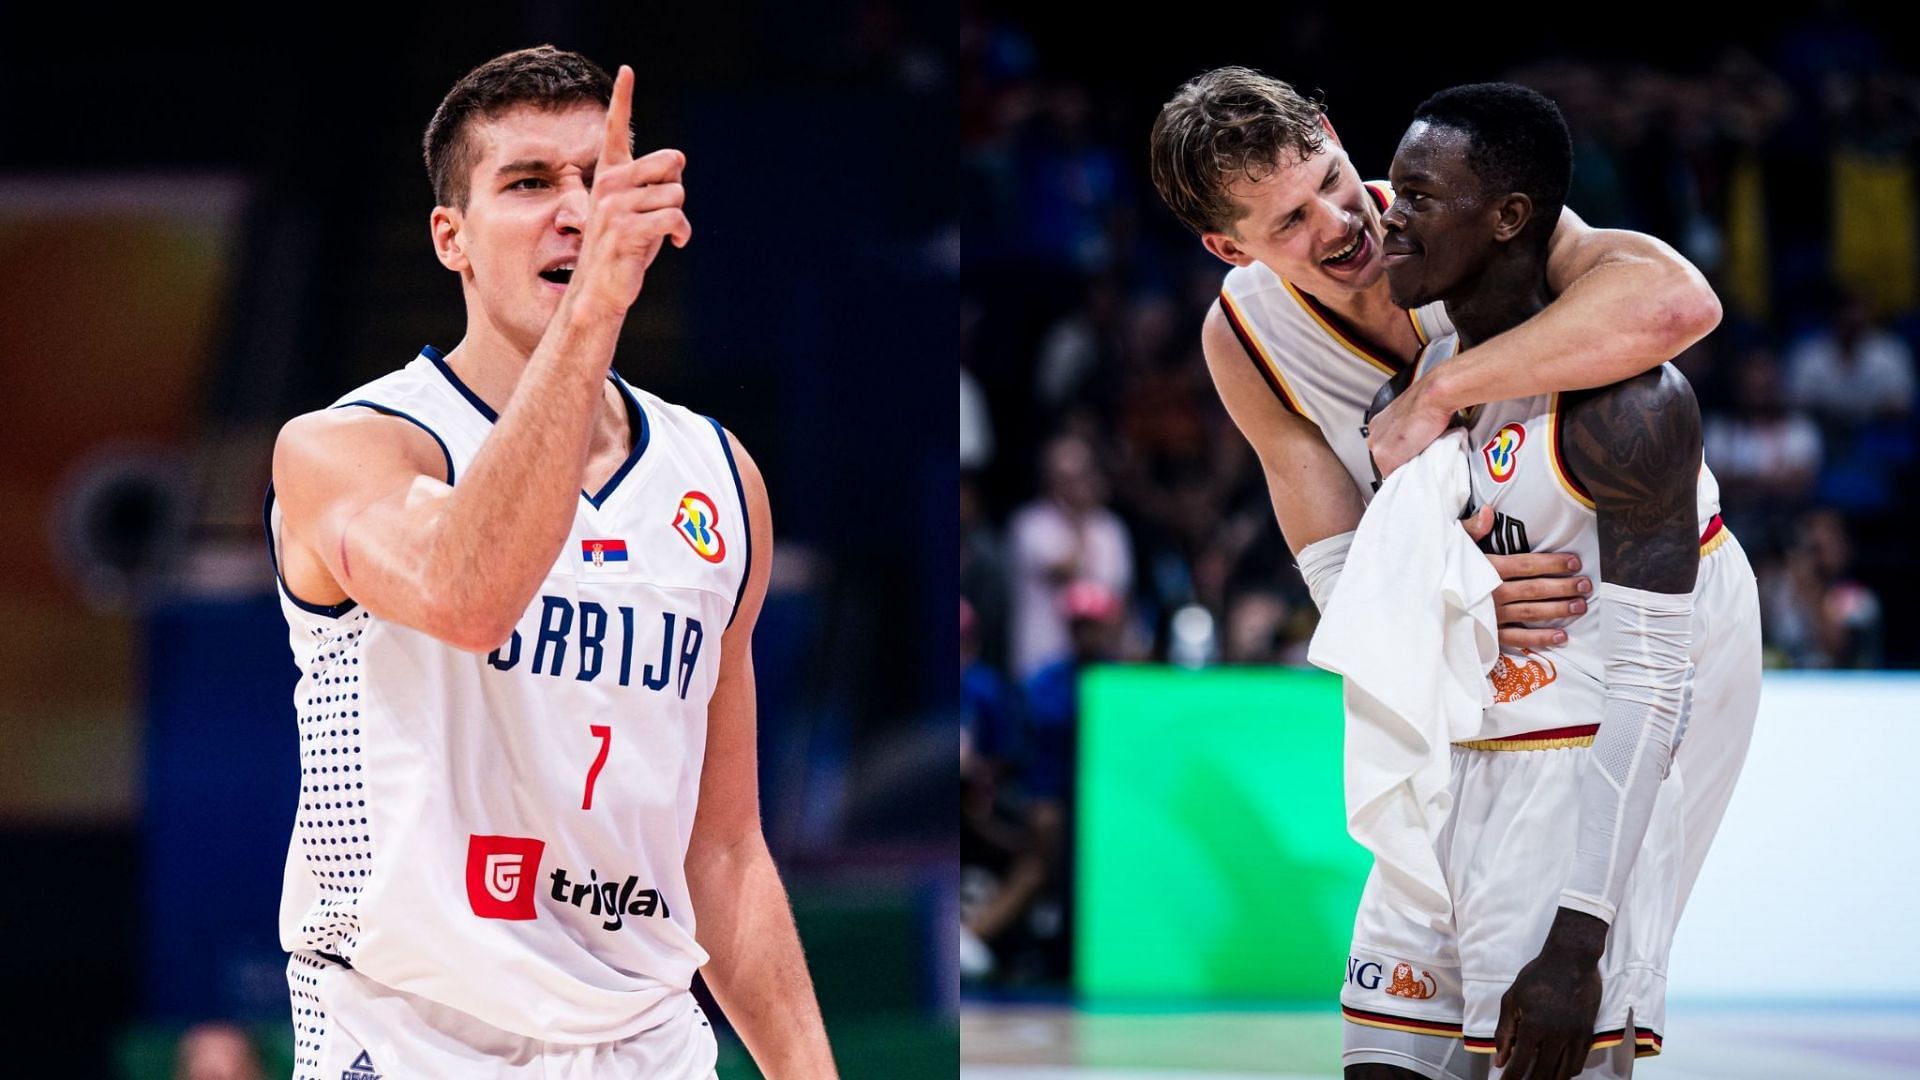 Serbia and Germany will face in the FIBA World Cup finals